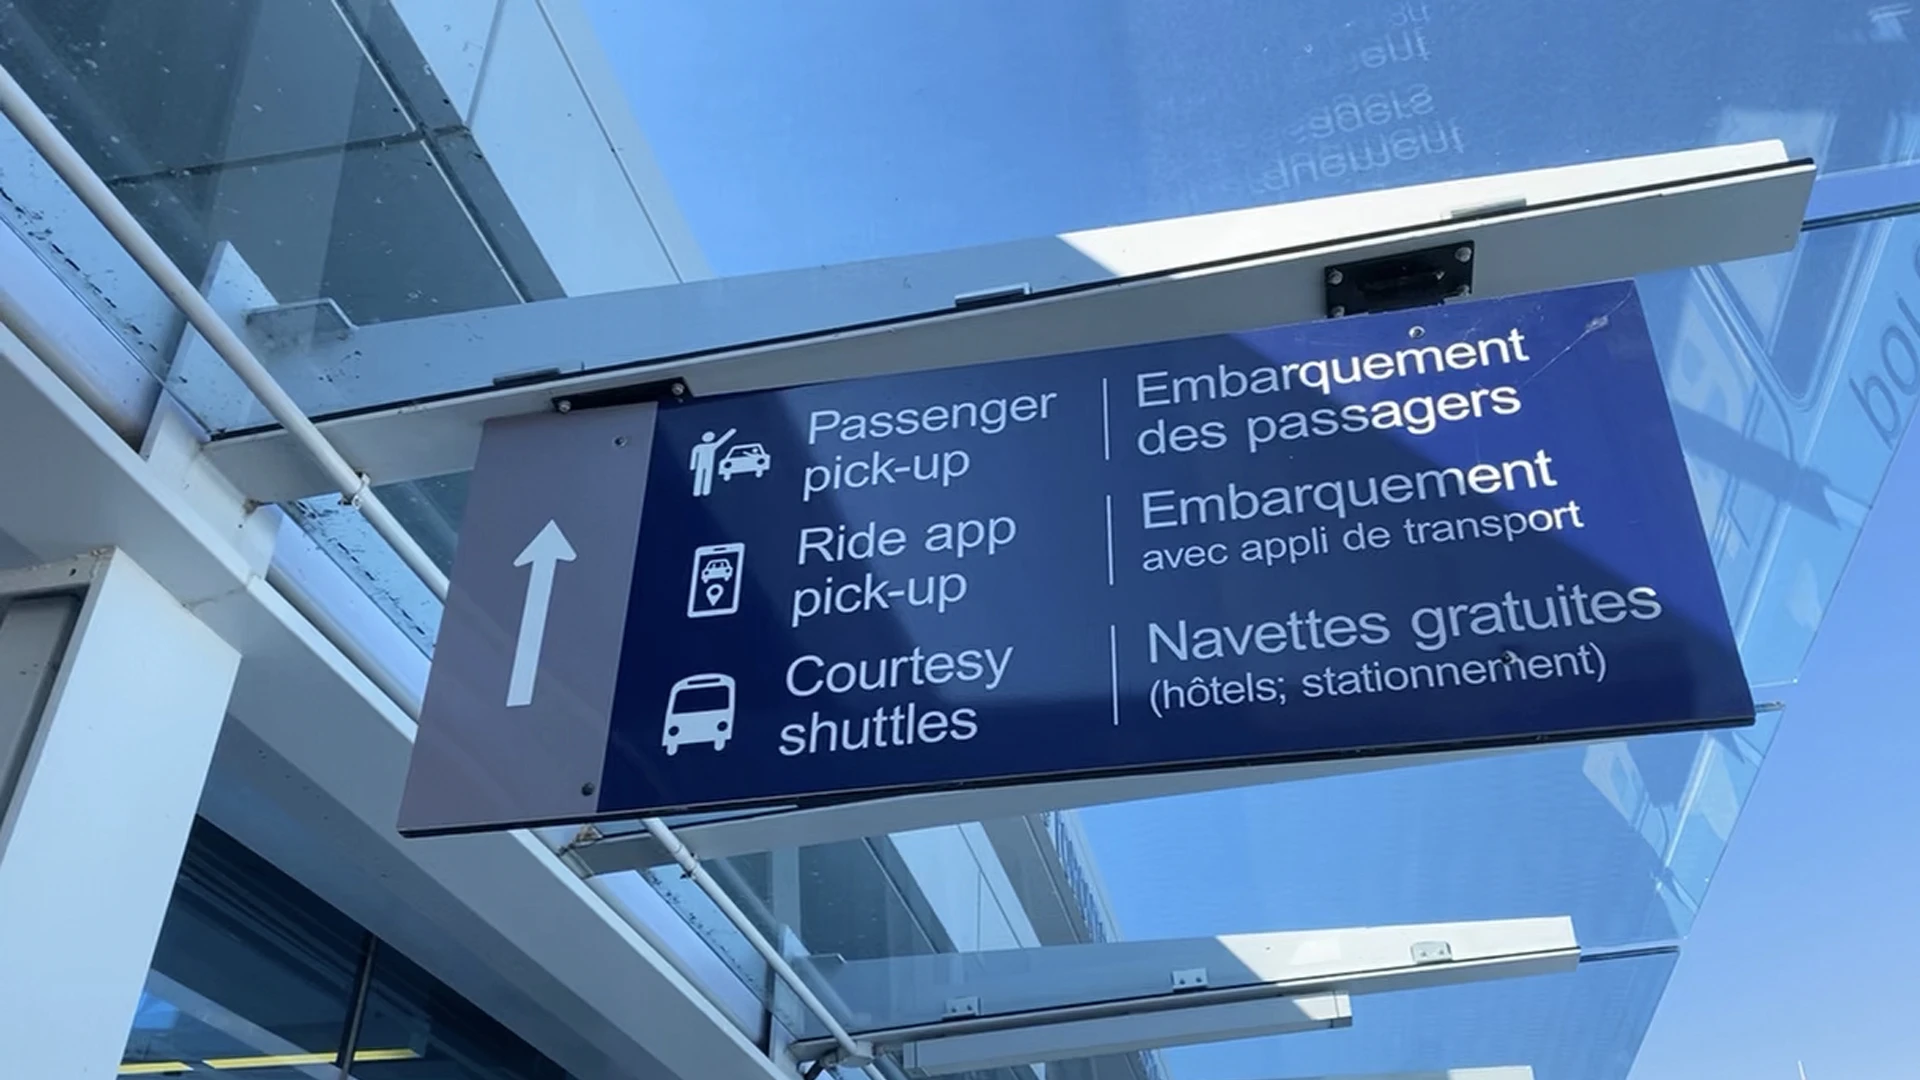 Sign at the airport for passenger pick-up, ride app pick-up and coutesy shuttles